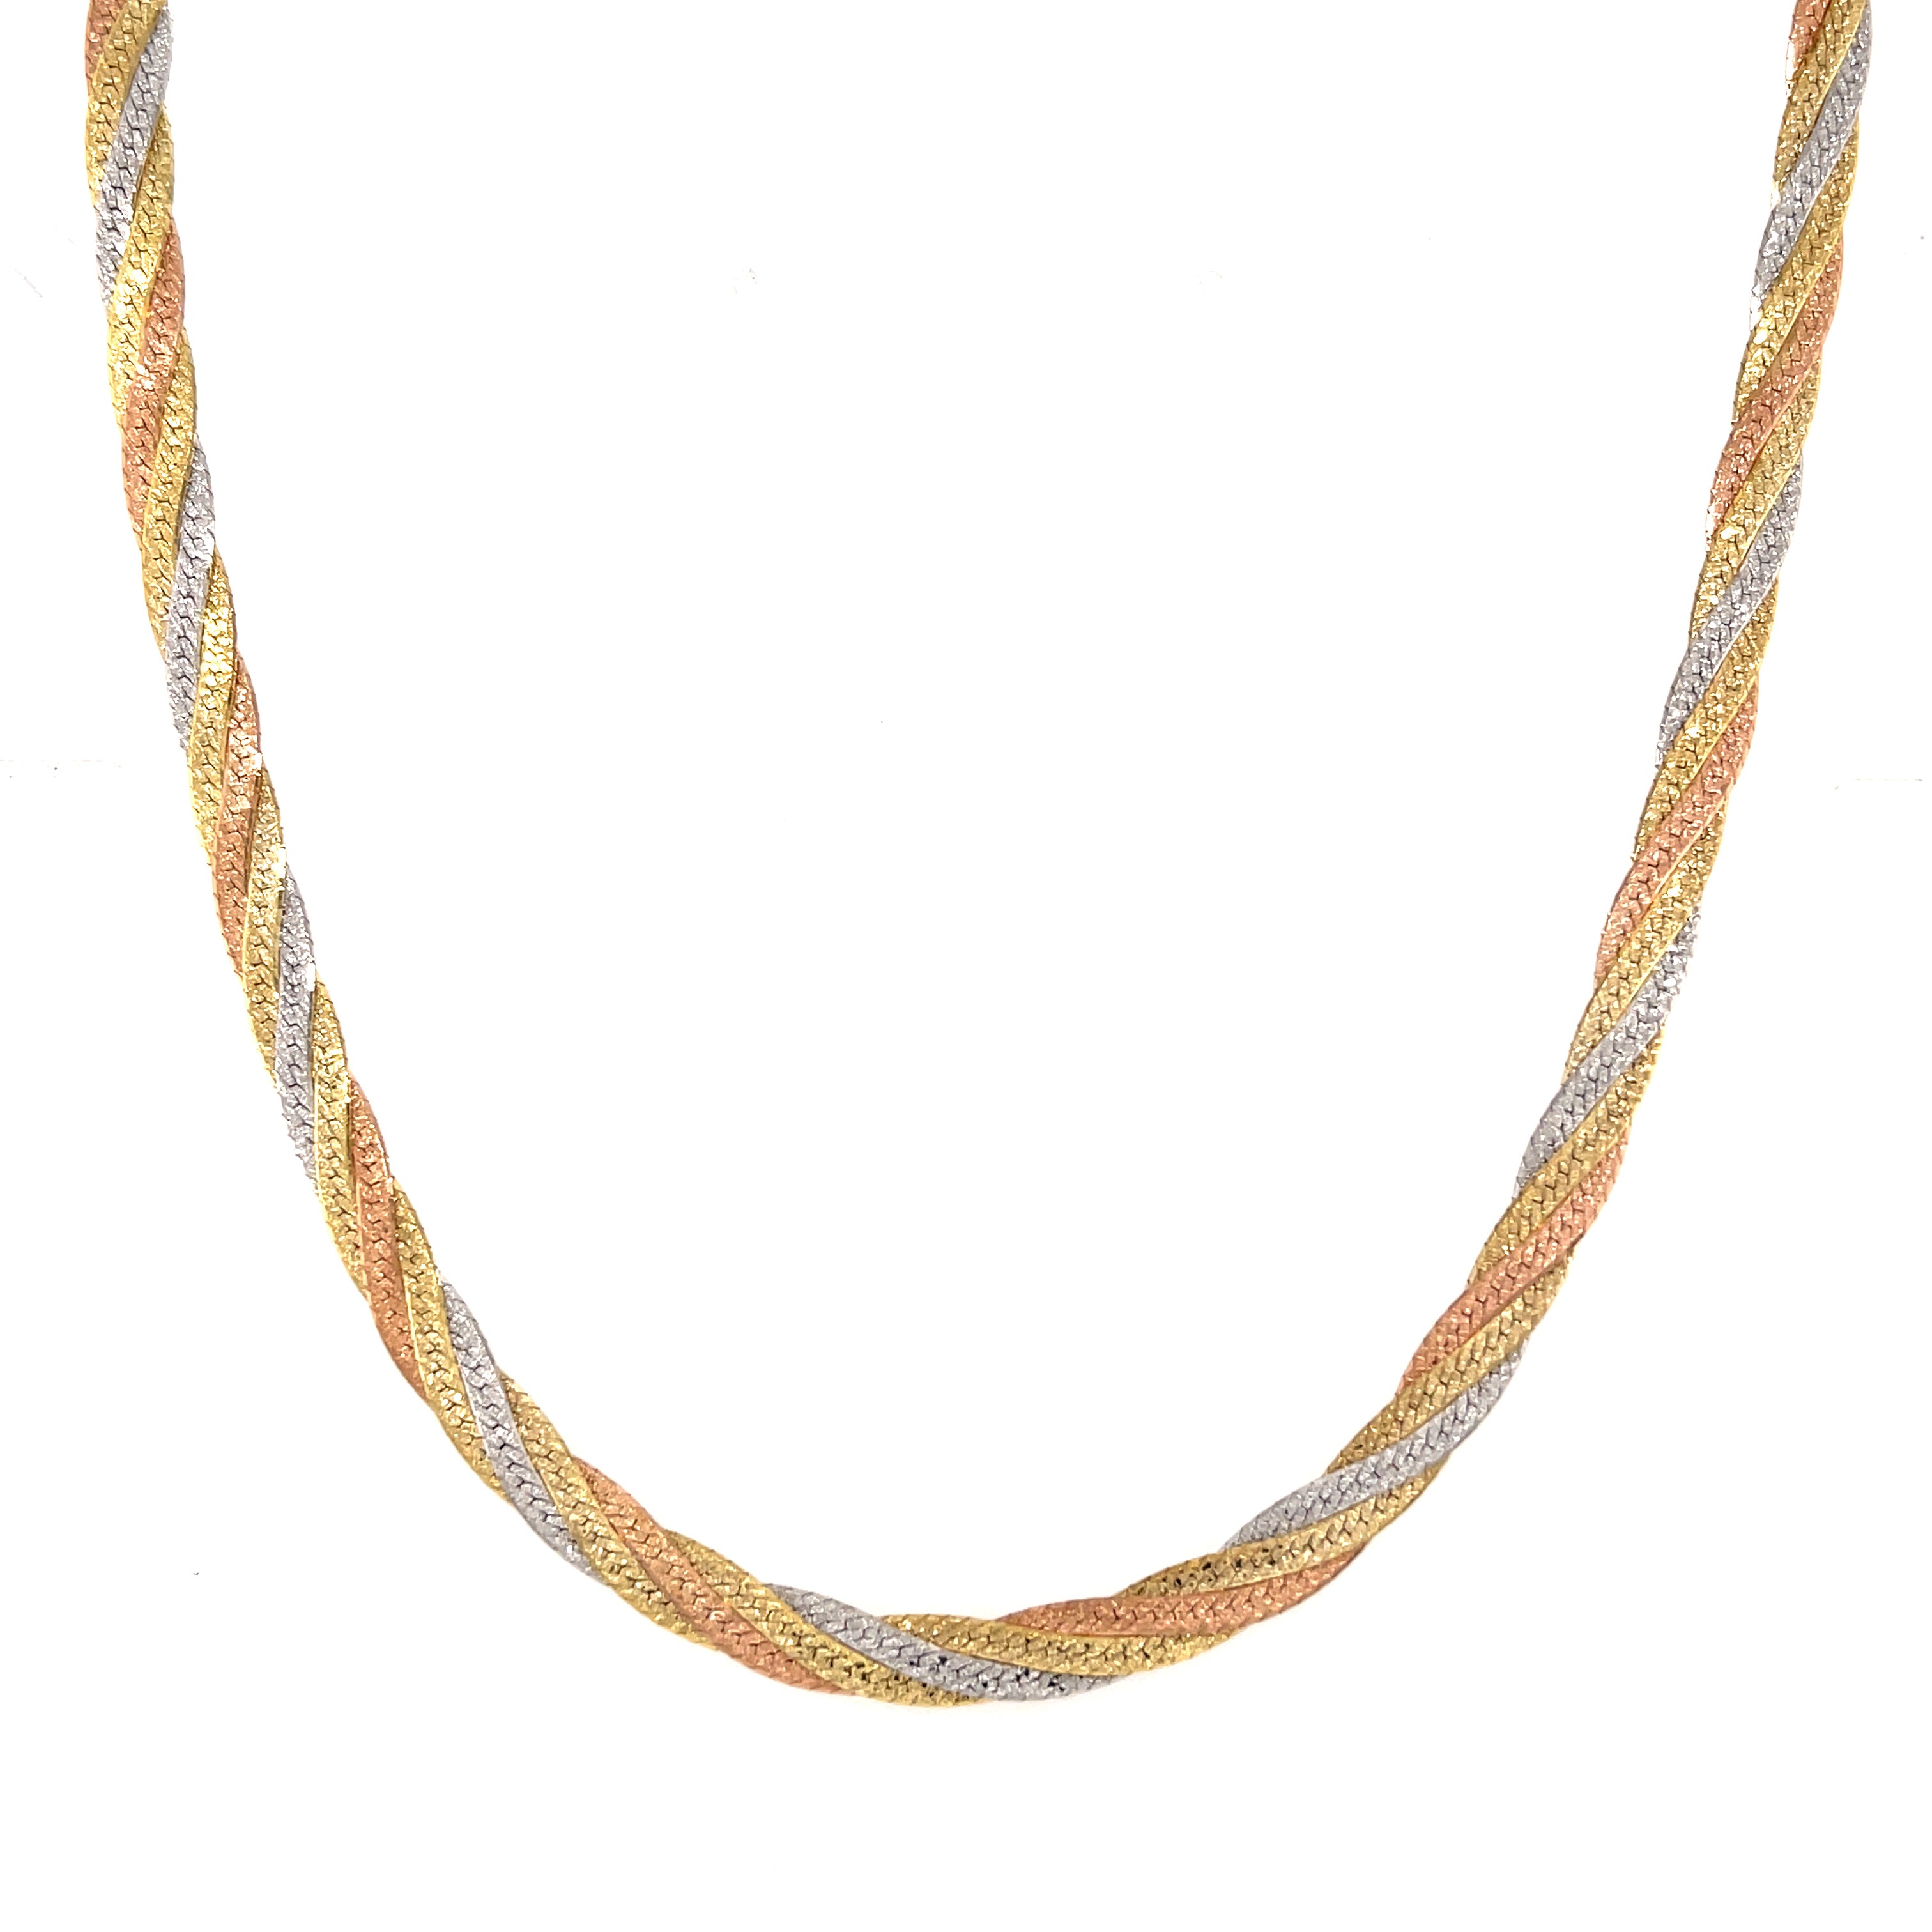 9ct Yellow White & Rose Gold 16 Inch Woven Necklace - 10.80g